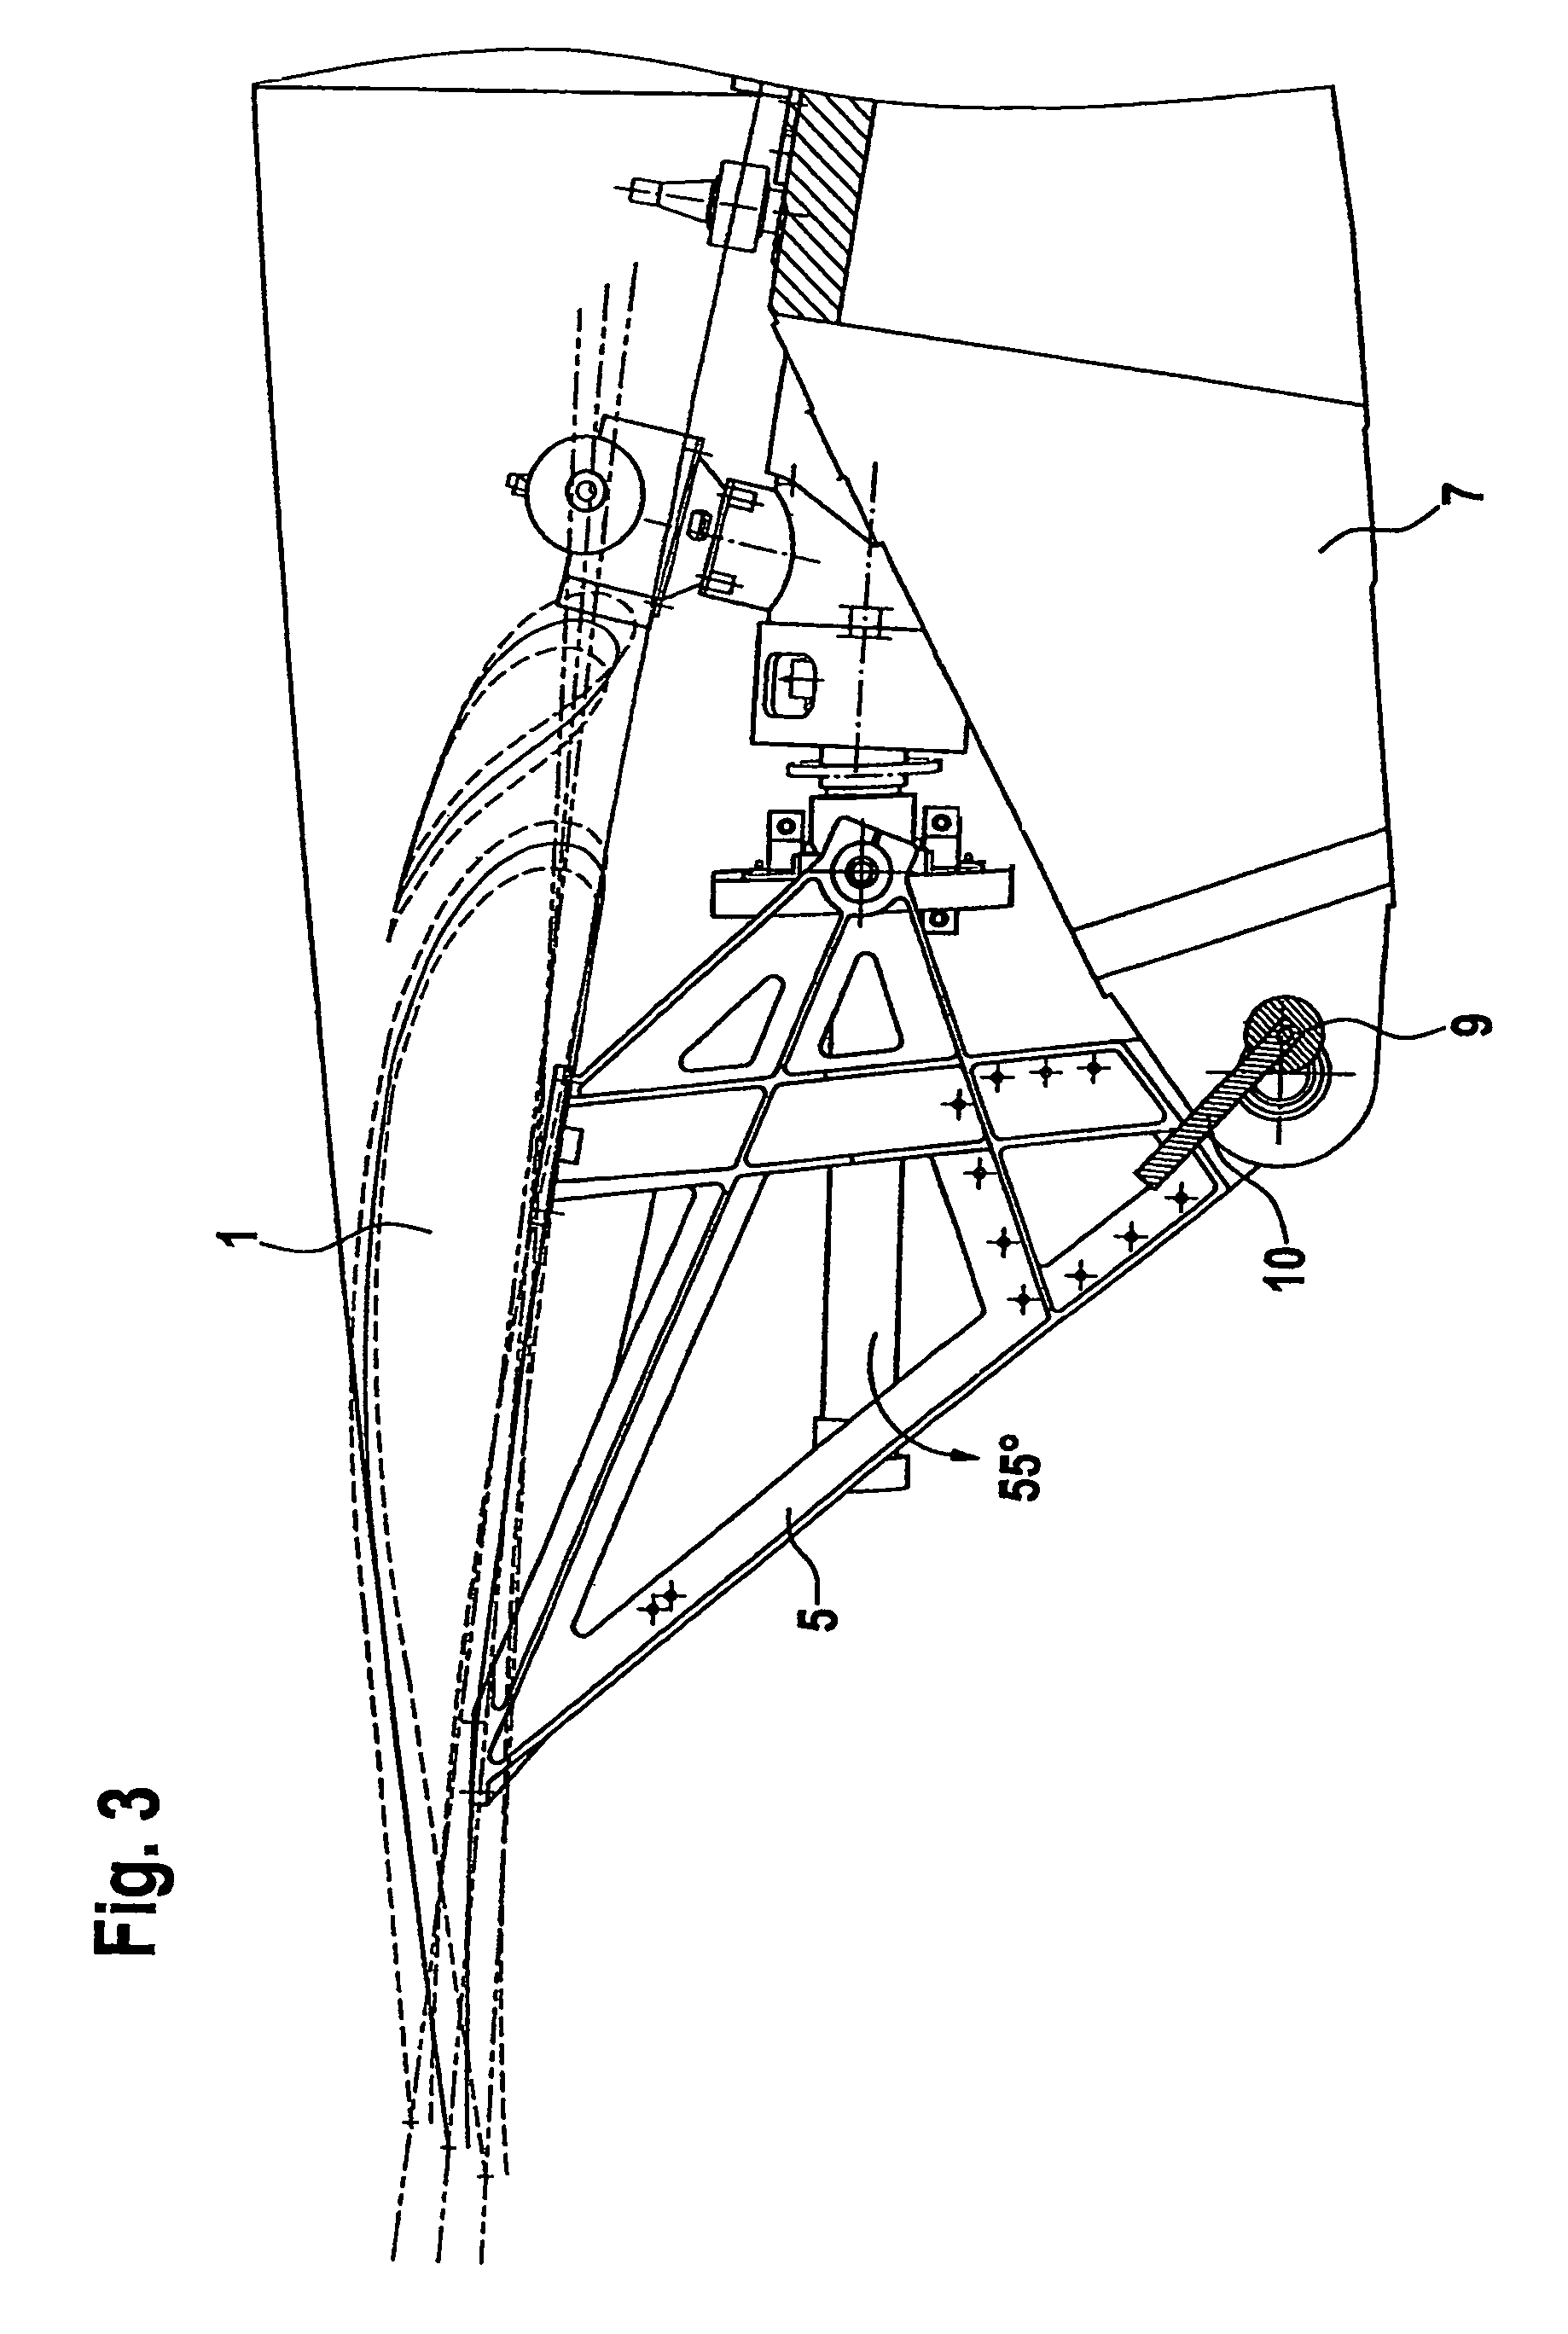 Device for monitoring tiltable flaps on aircraft wings